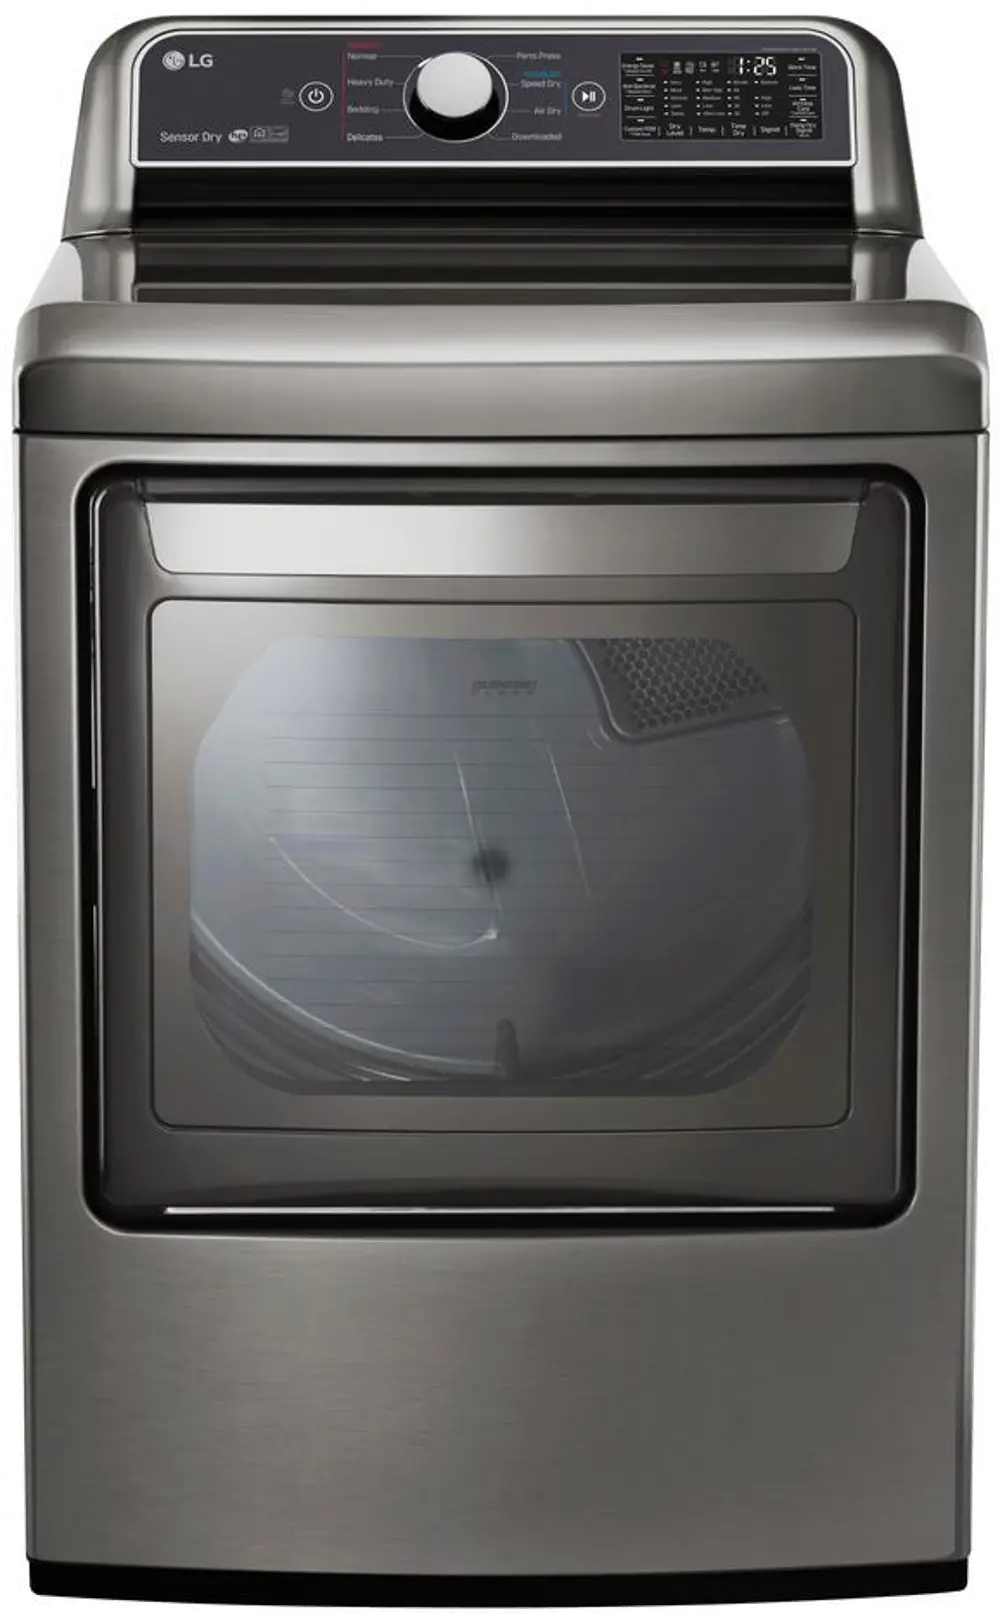 DLE7300VE LG Rear Control Electric Dryer with Sensor Dry - 7.3 cu.ft.  Graphite Steel-1